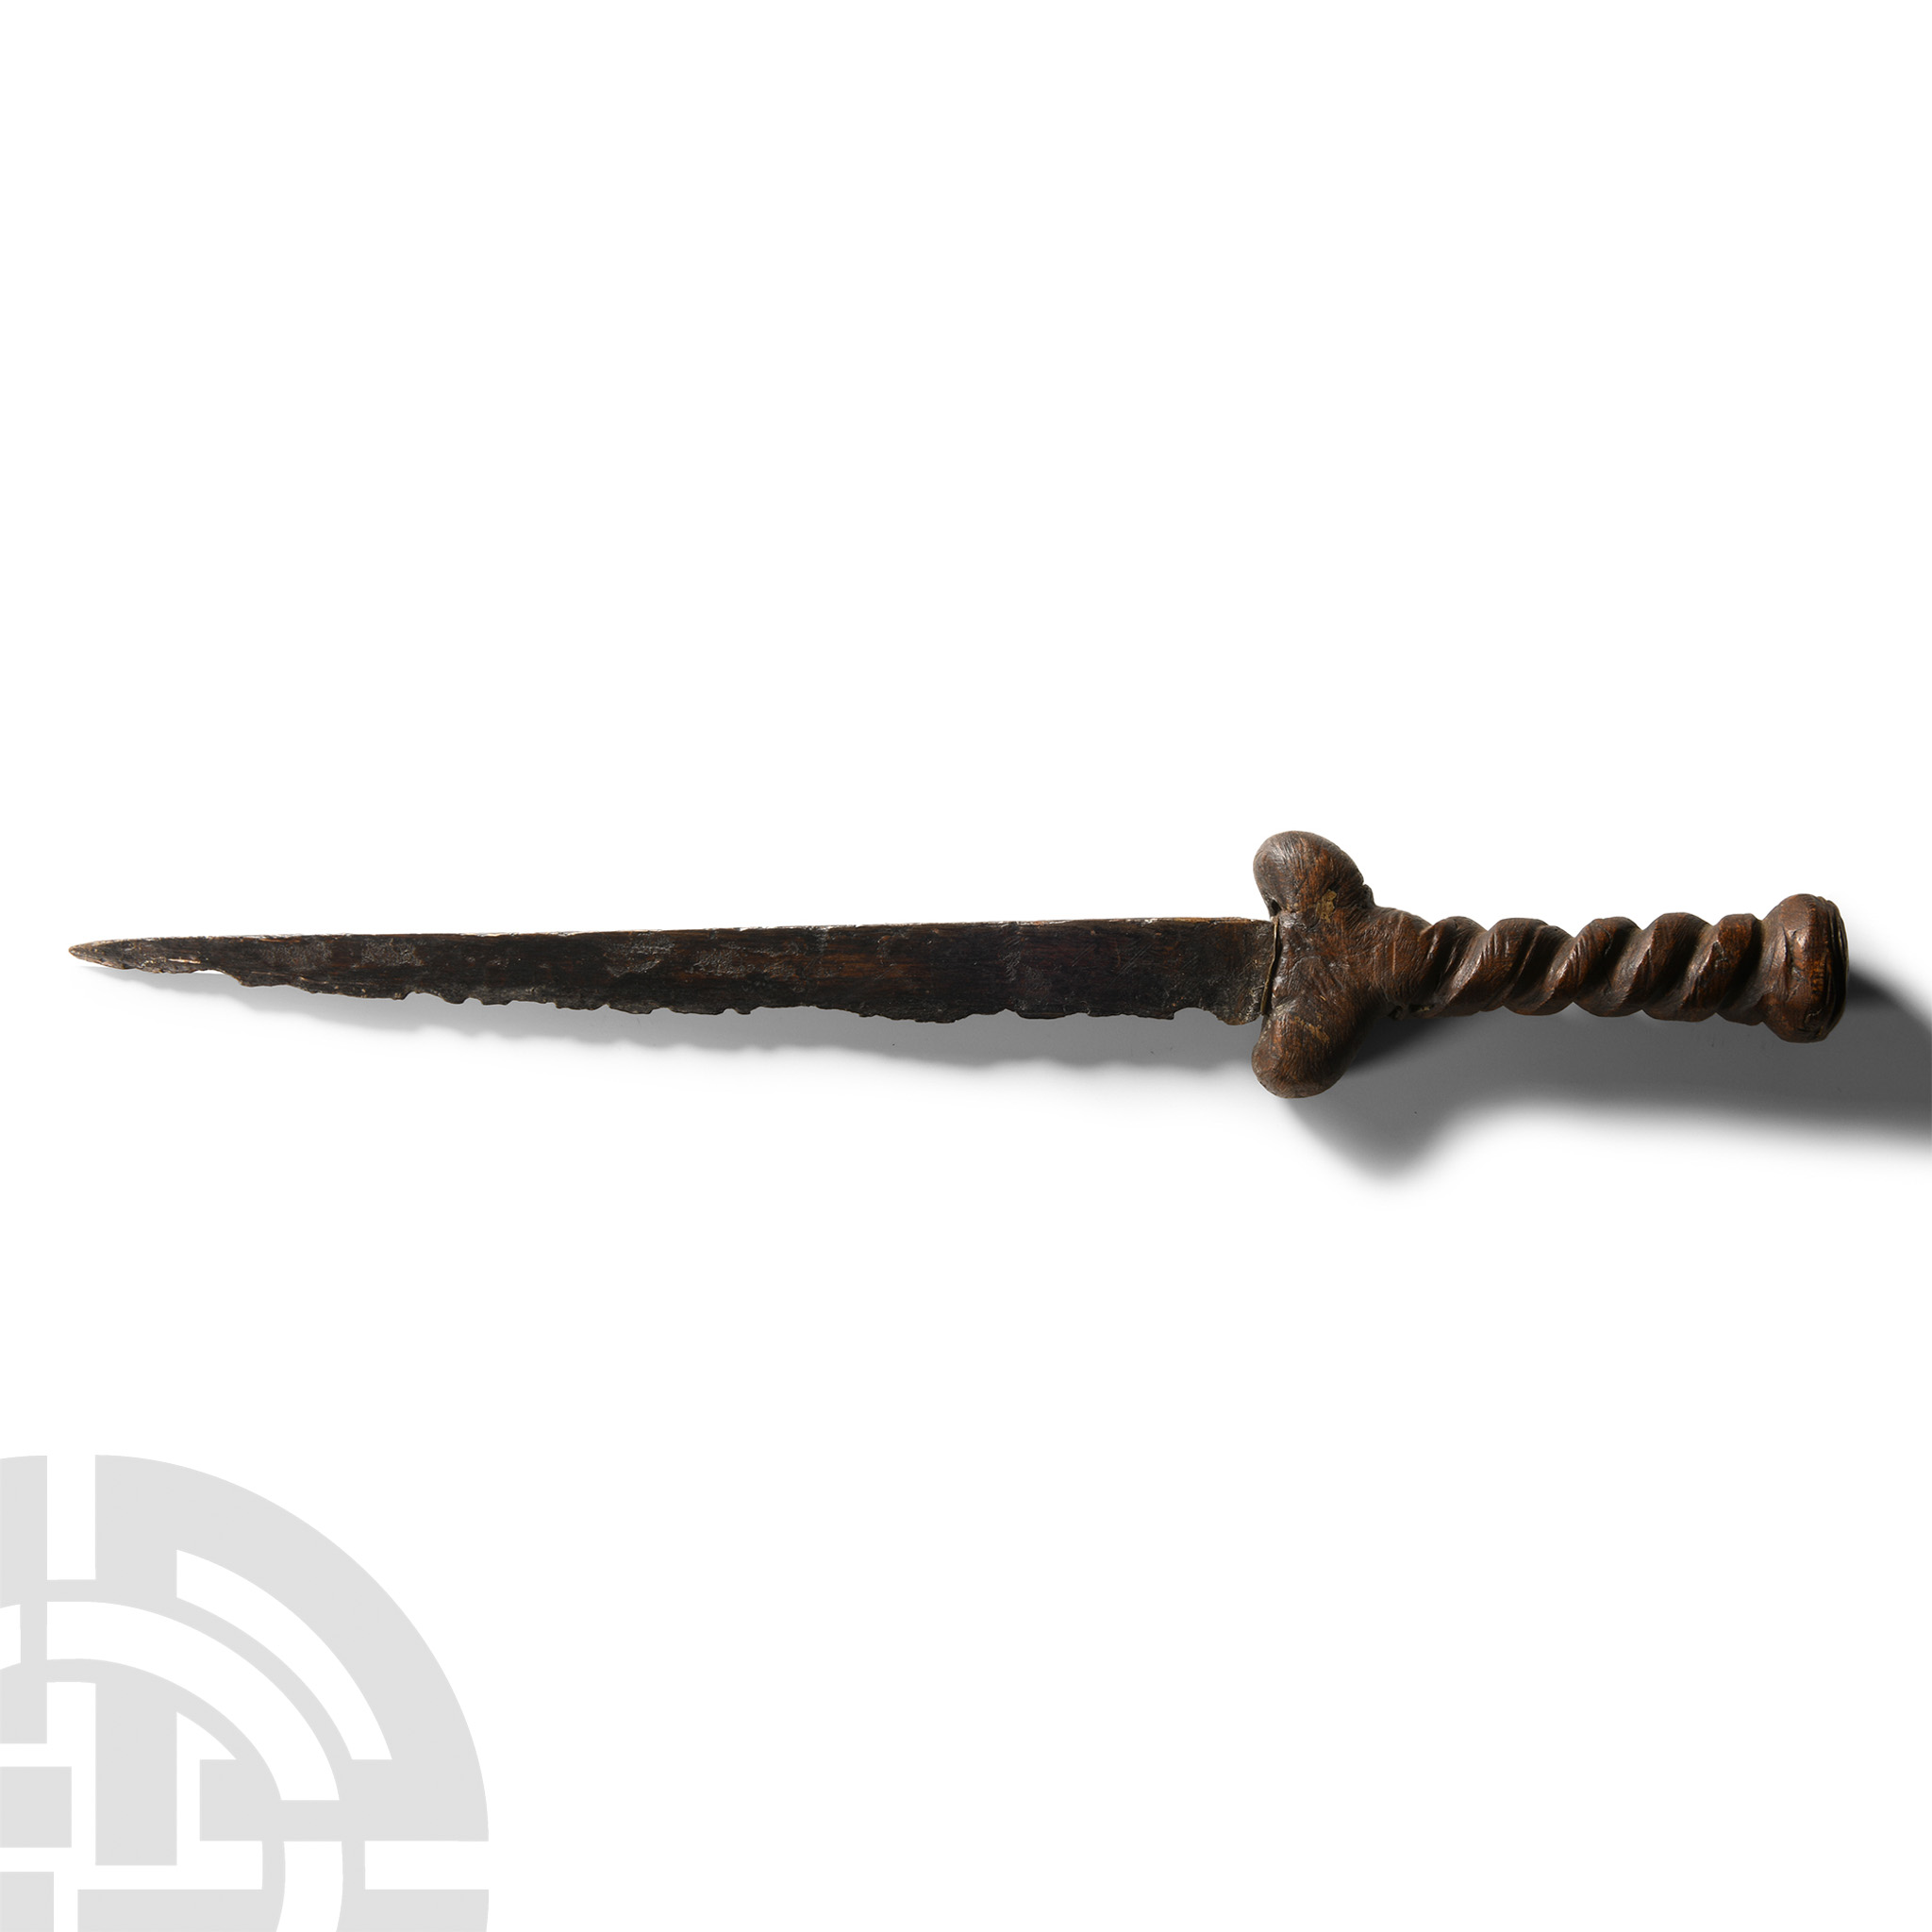 Medieval 'Thames' Iron Dagger with Wood Handle